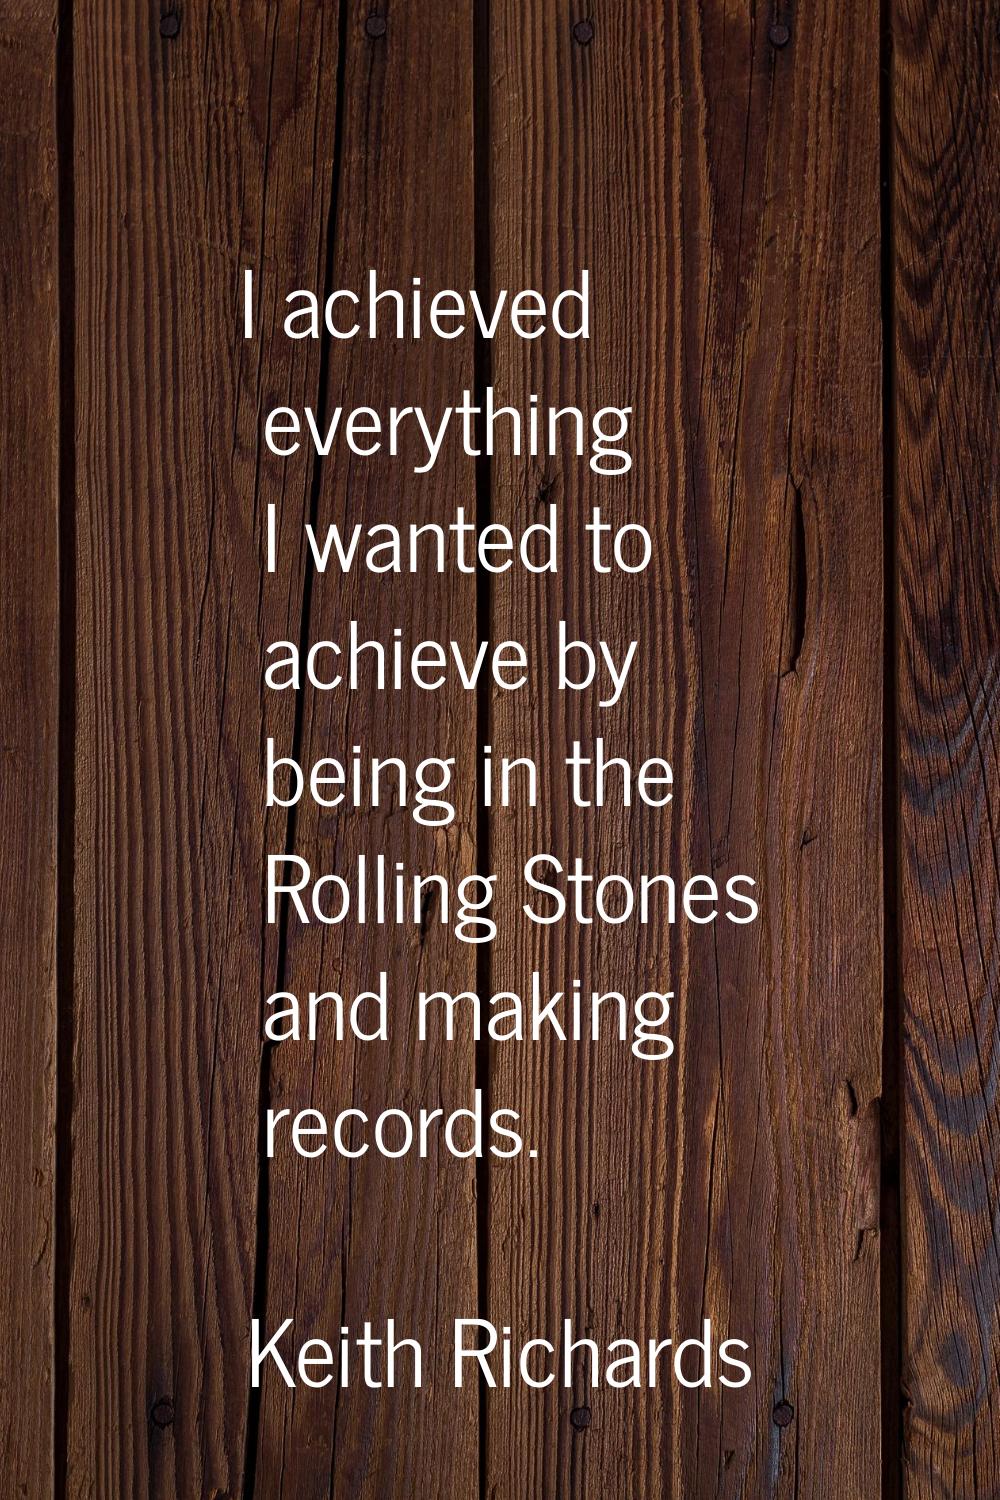 I achieved everything I wanted to achieve by being in the Rolling Stones and making records.